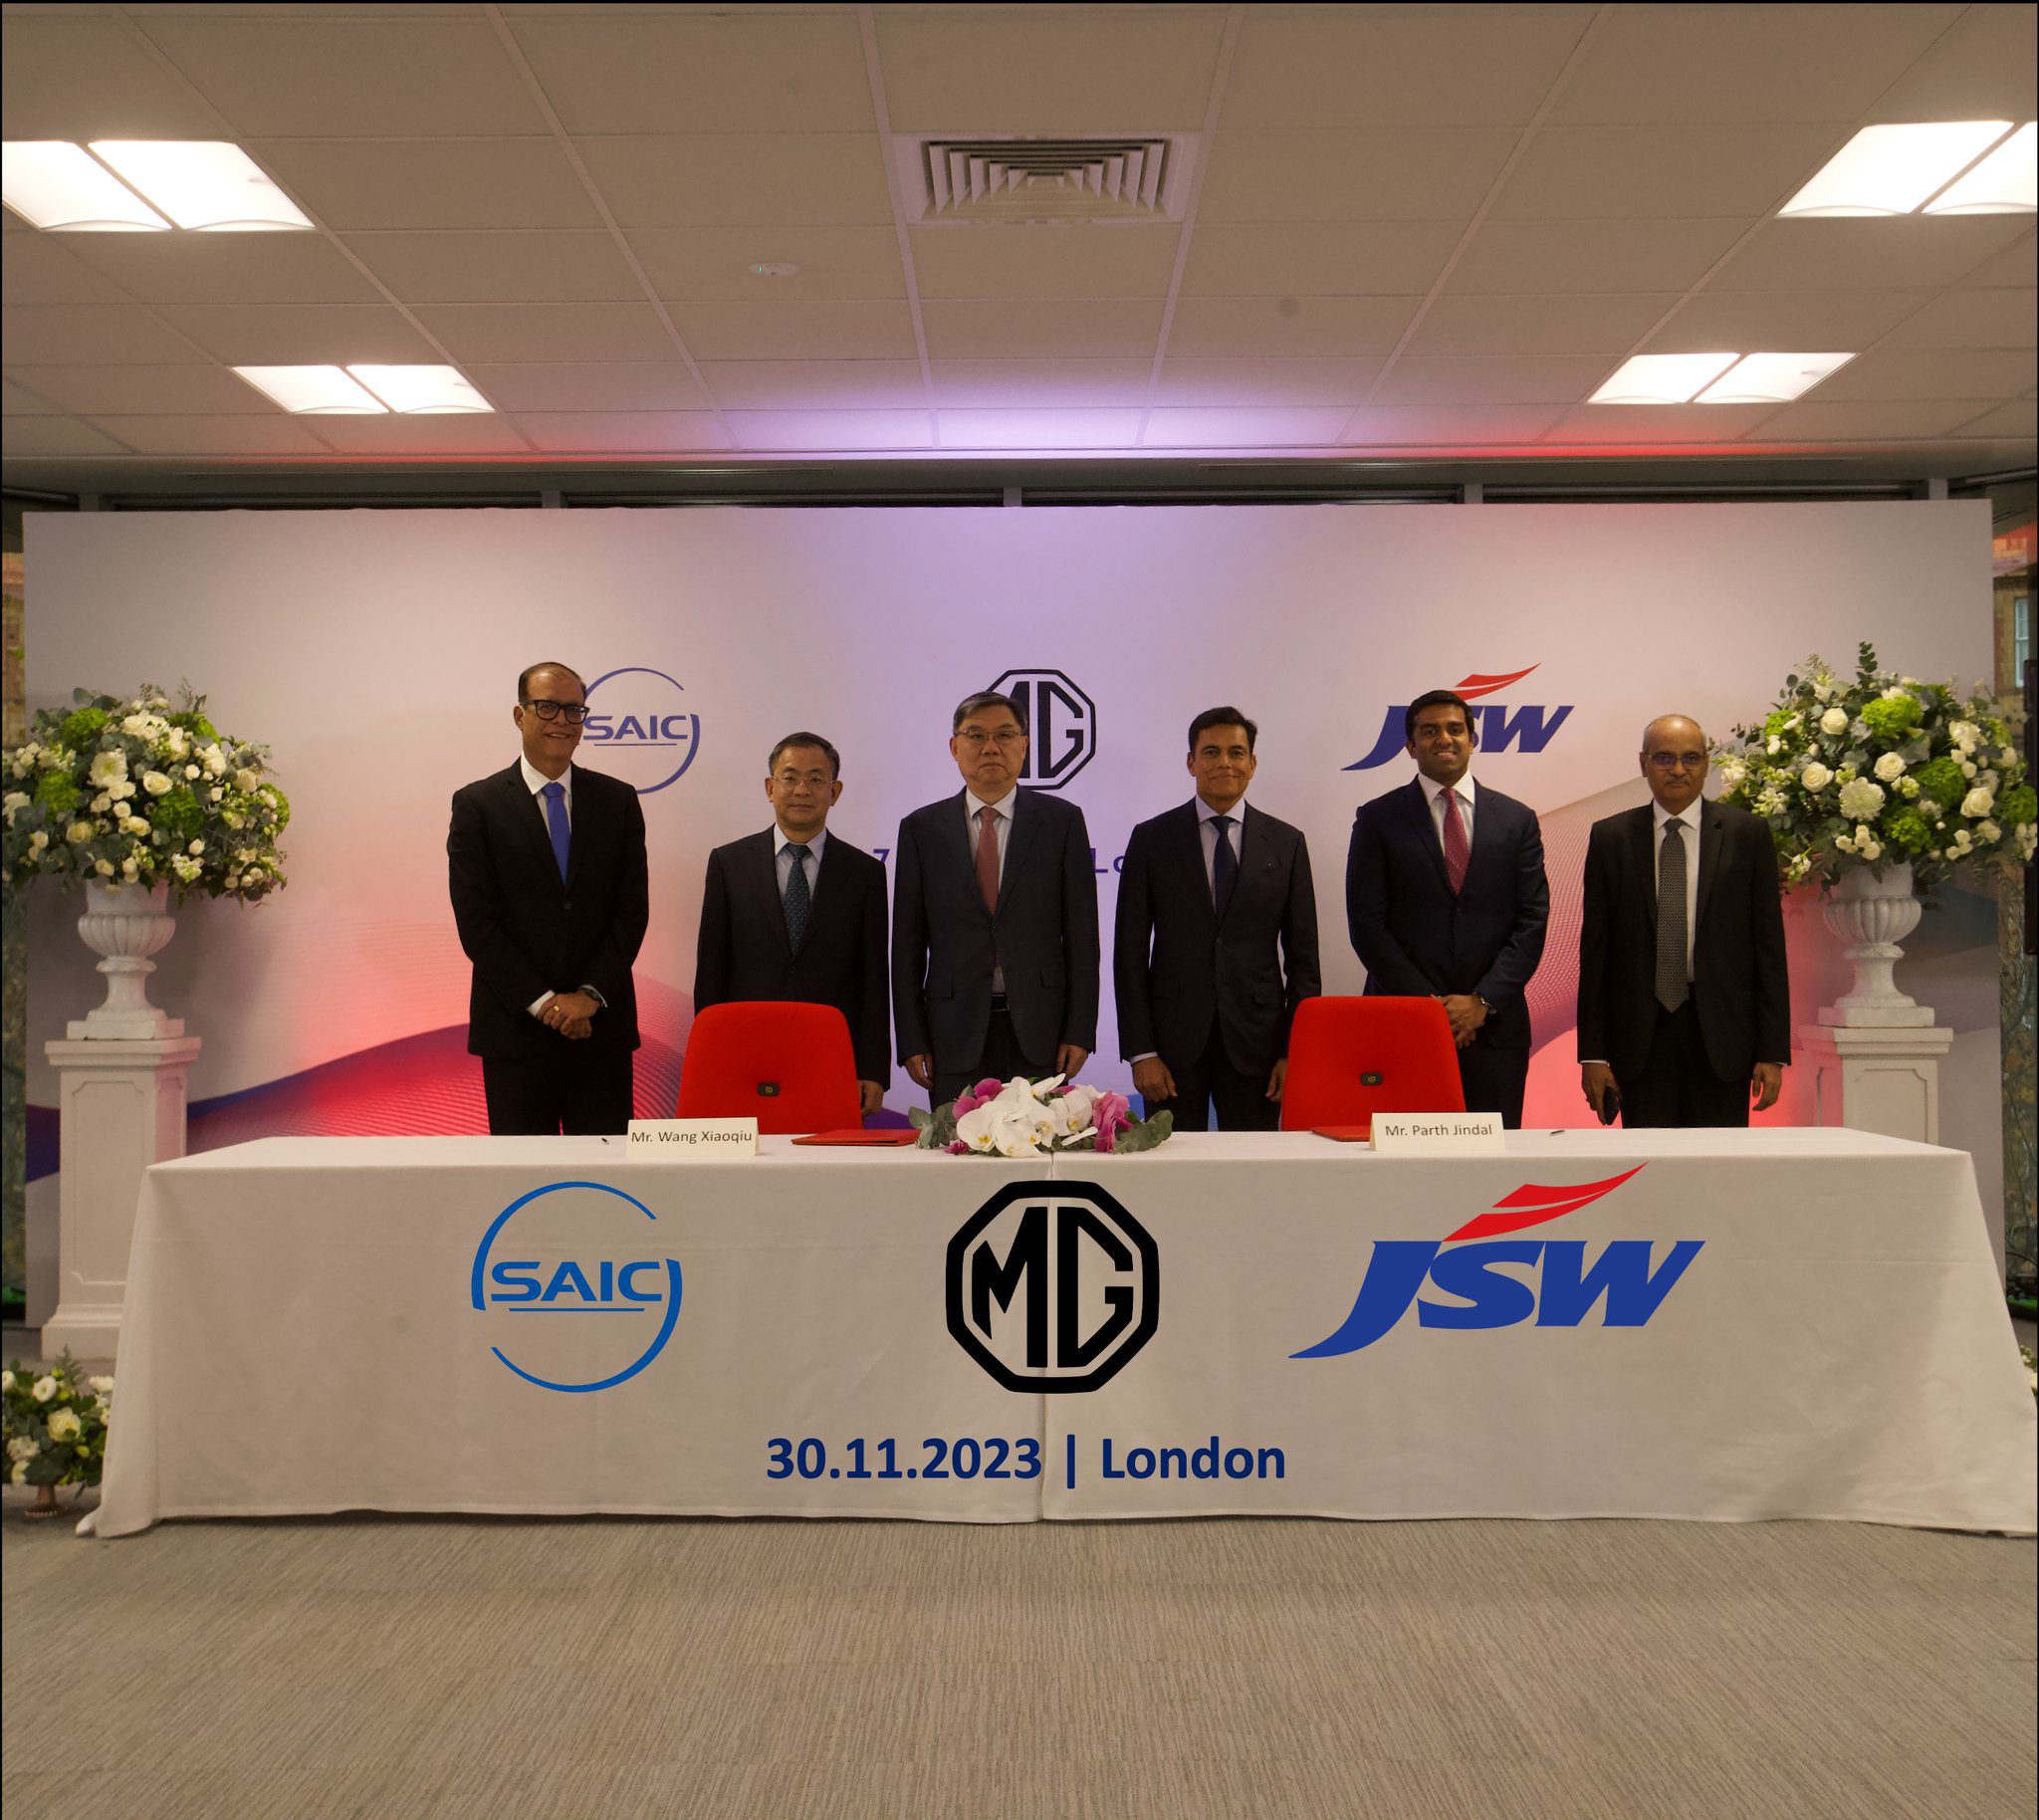 jsw and mg jv announced